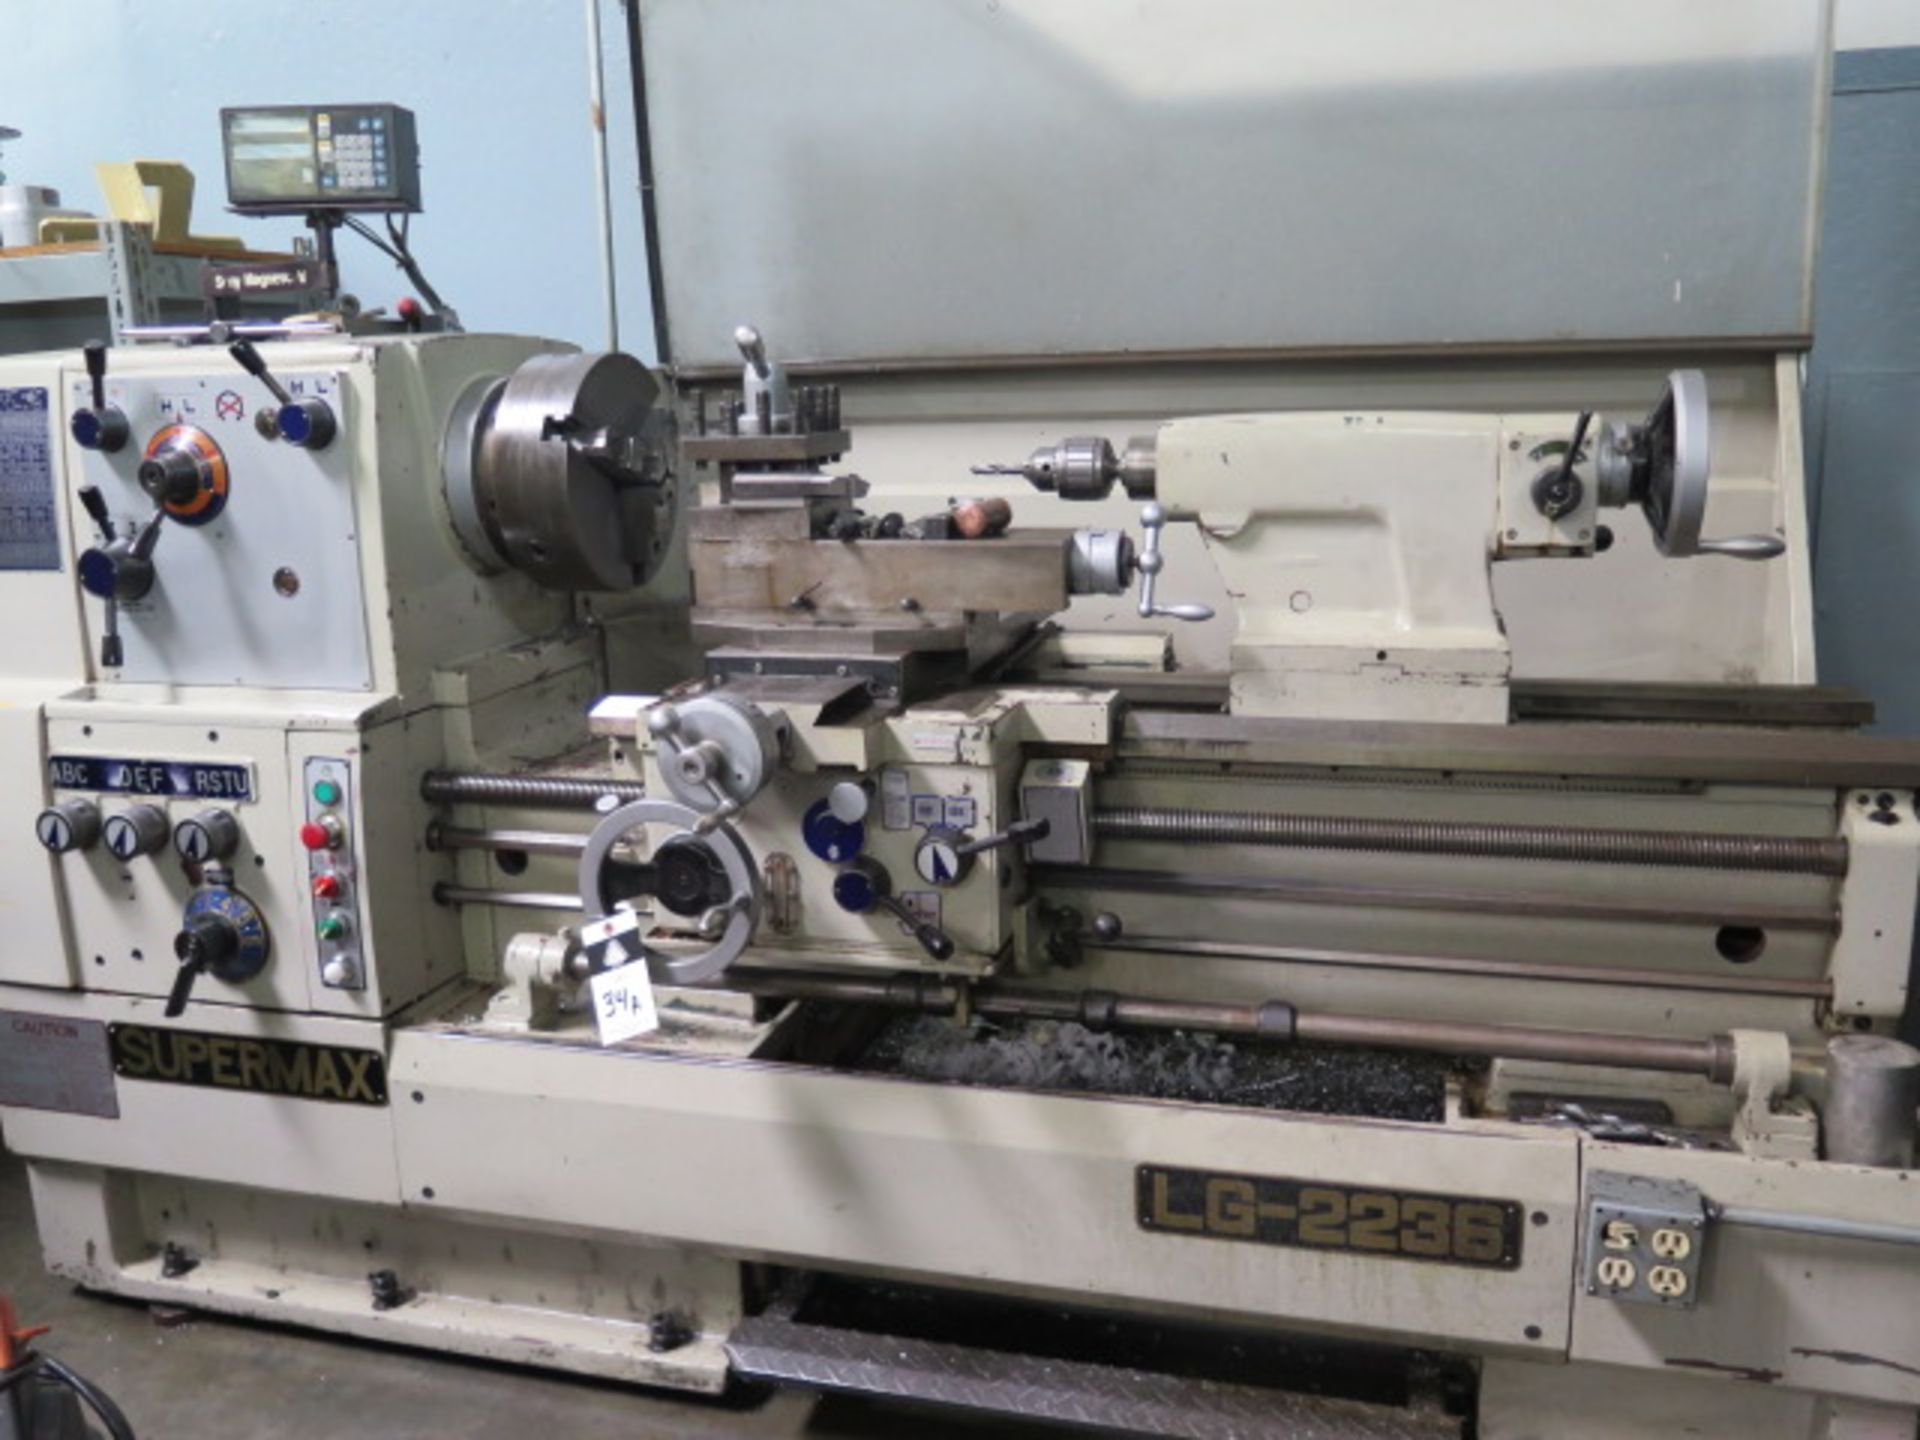 Supermax LG2236G 22" x 36" Geared Head Gap Bed Lathe w/ Sony DRO, 20-1550 RPM, Inch/mm, SOLD AS IS - Image 2 of 18